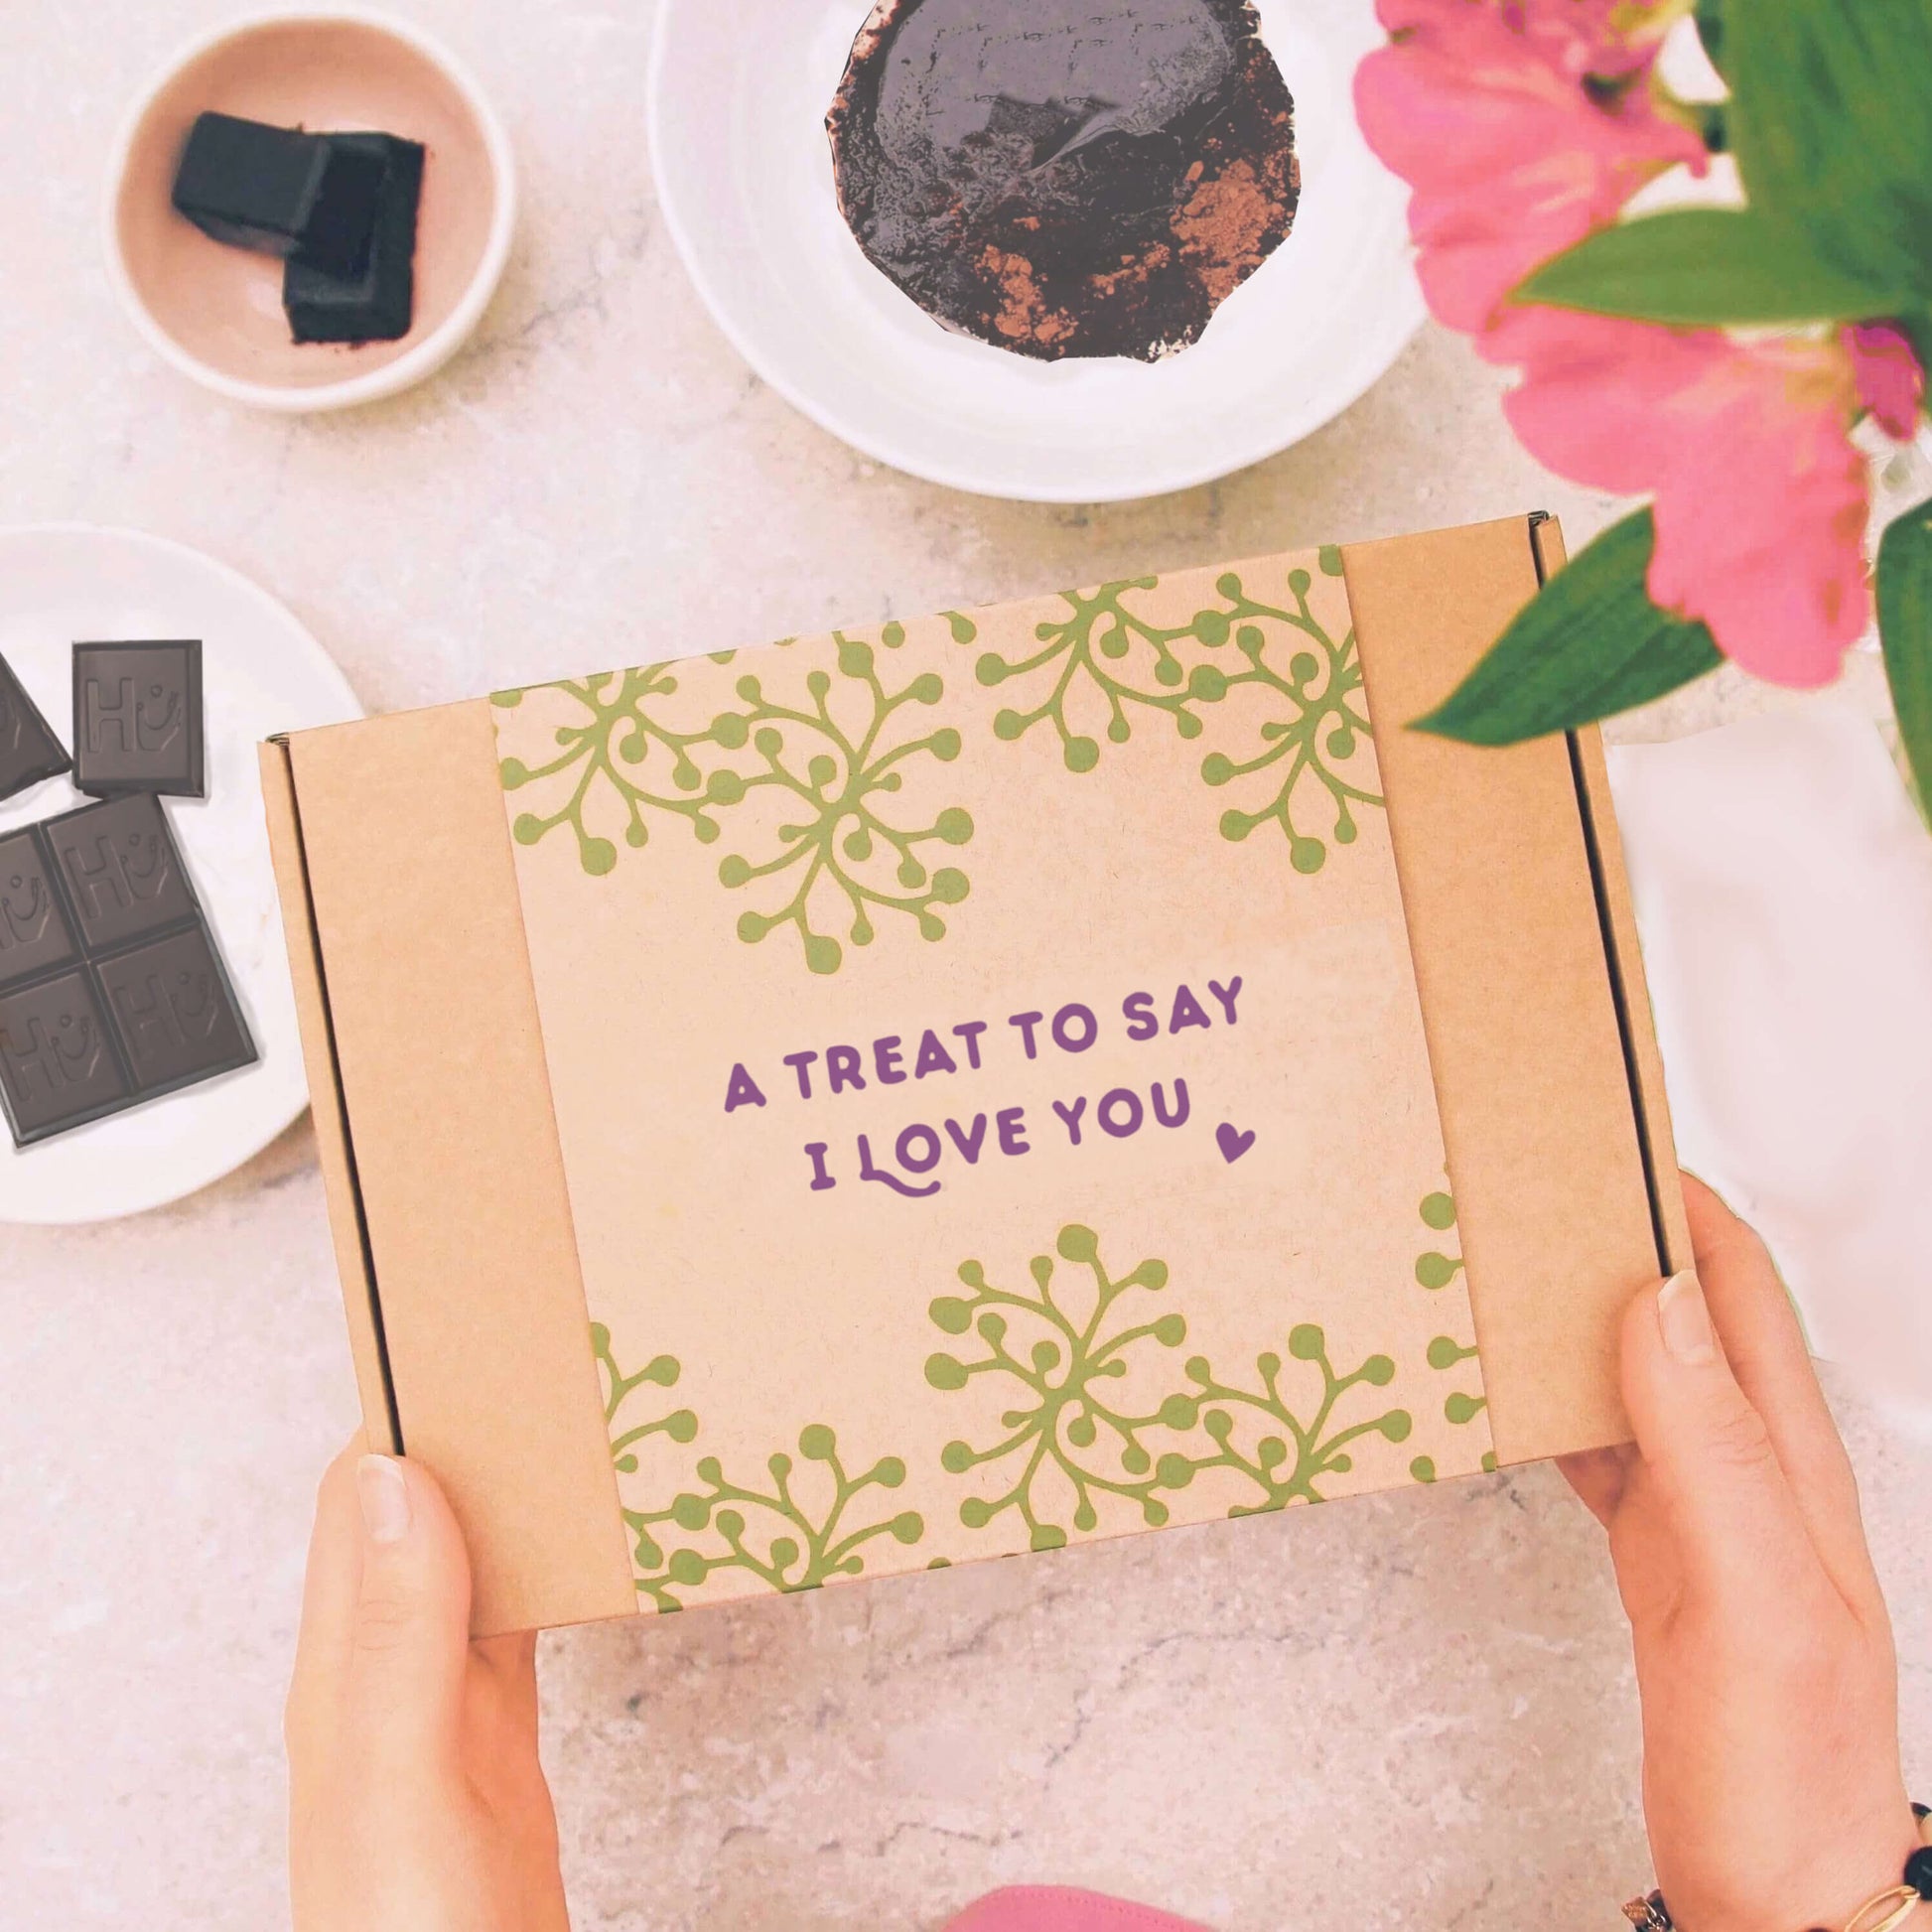 letterbox gift with gift message ' a treat to say i love you'